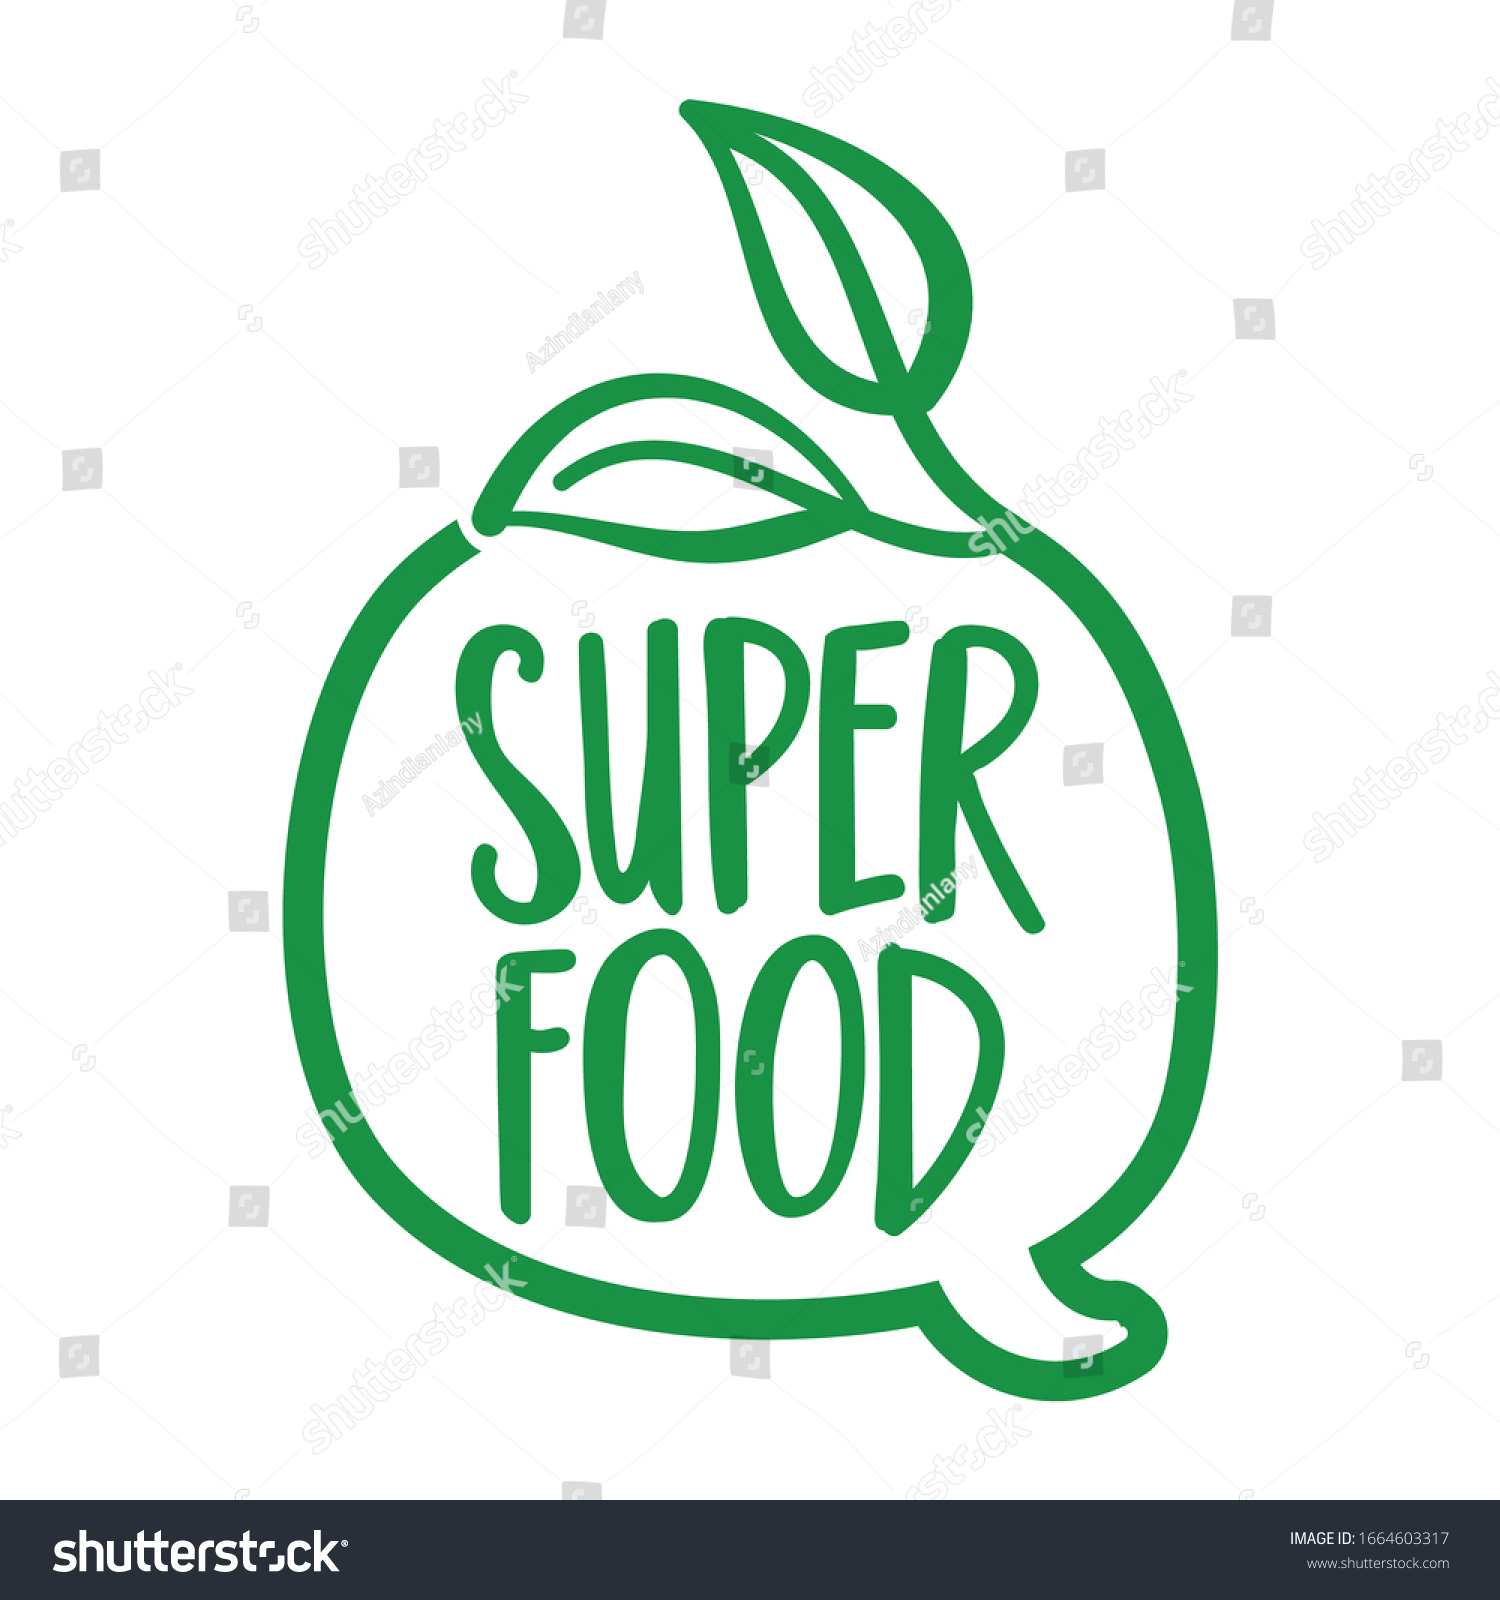 Super food logo - Support healthy food, buy fresh products. Flat vector illustrations on white background. Element for labels, stickers or icons, t-shirts or mugs. healthy food design. Go healthy. #1664603317